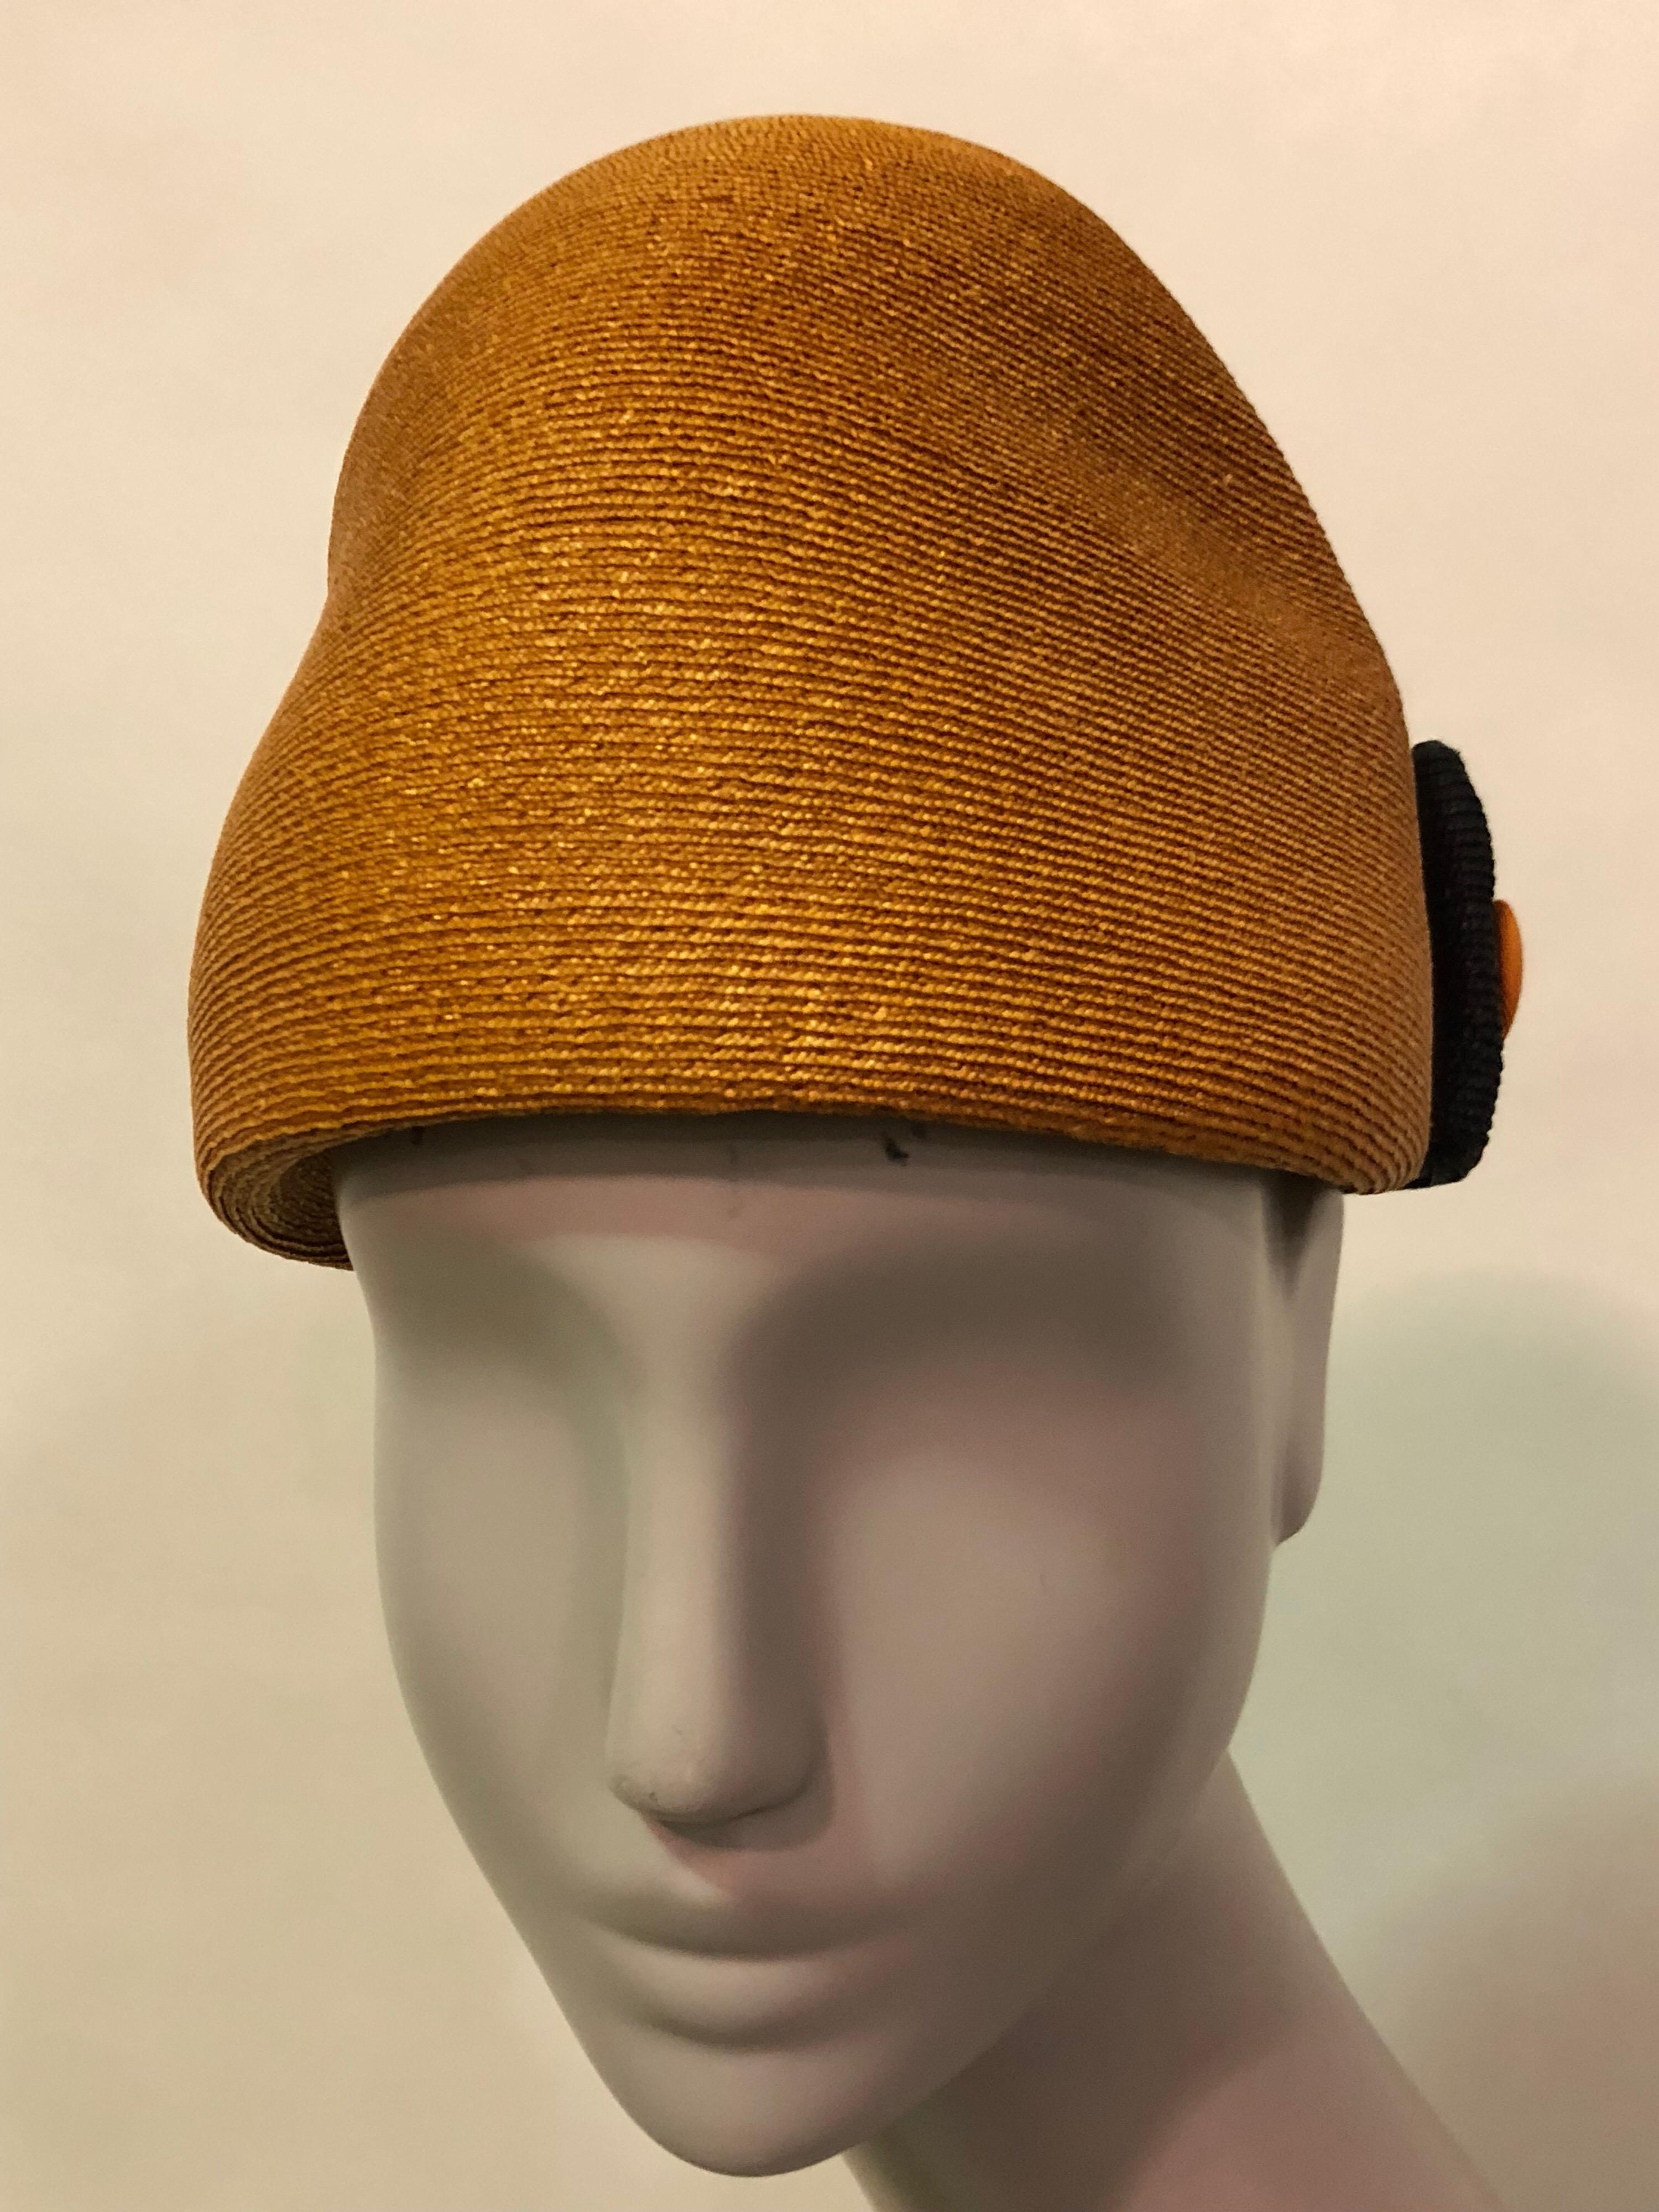 Schiaparelli Orange and Black Milanese Straw Dome Hat With Button Details, 50s  1